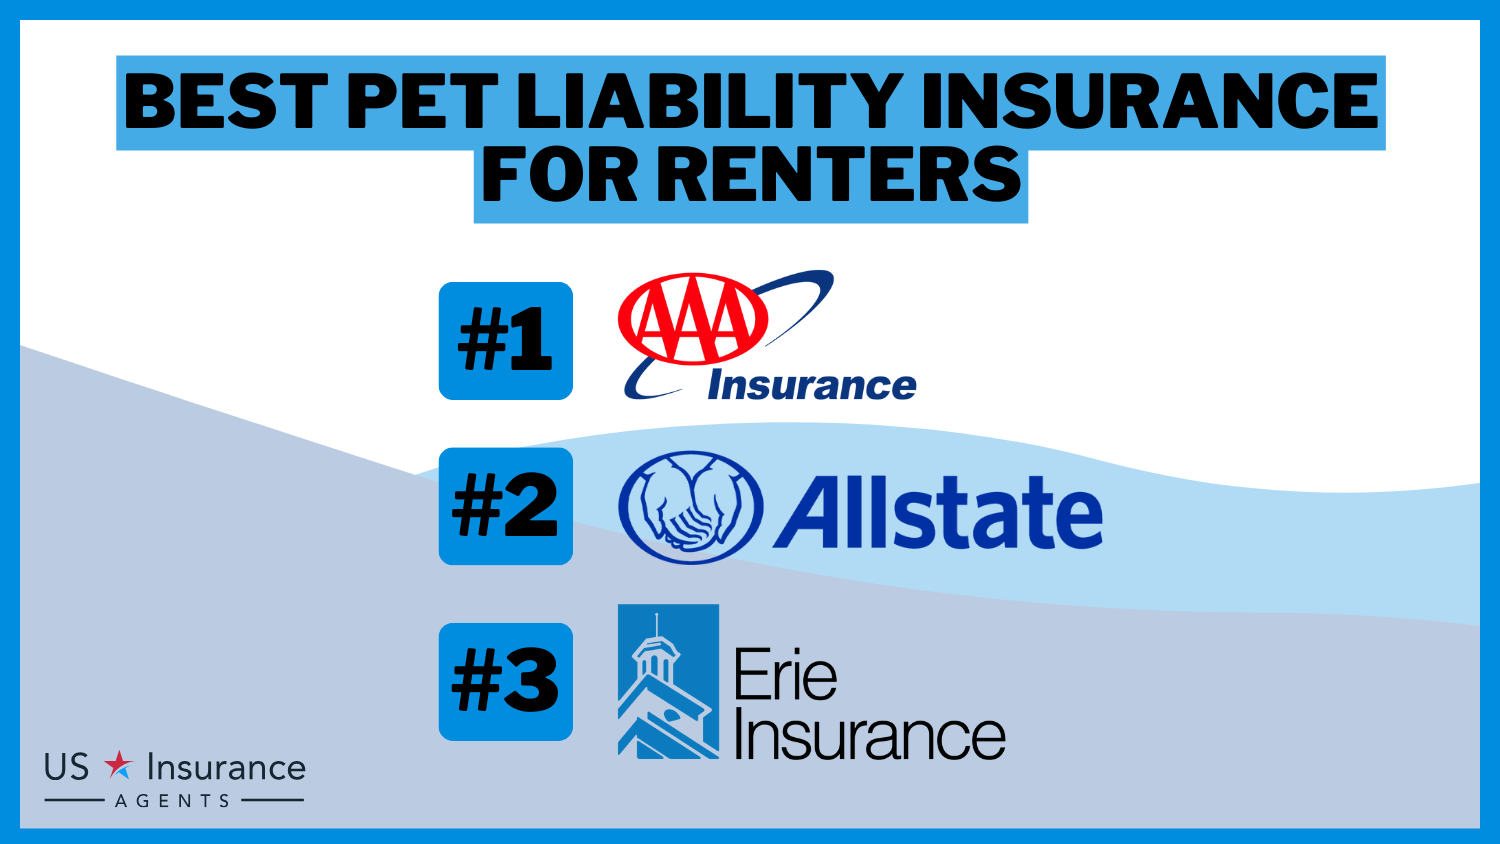 Best Pet Liability Insurance for Renters: AAA, Allstate, and Erie.